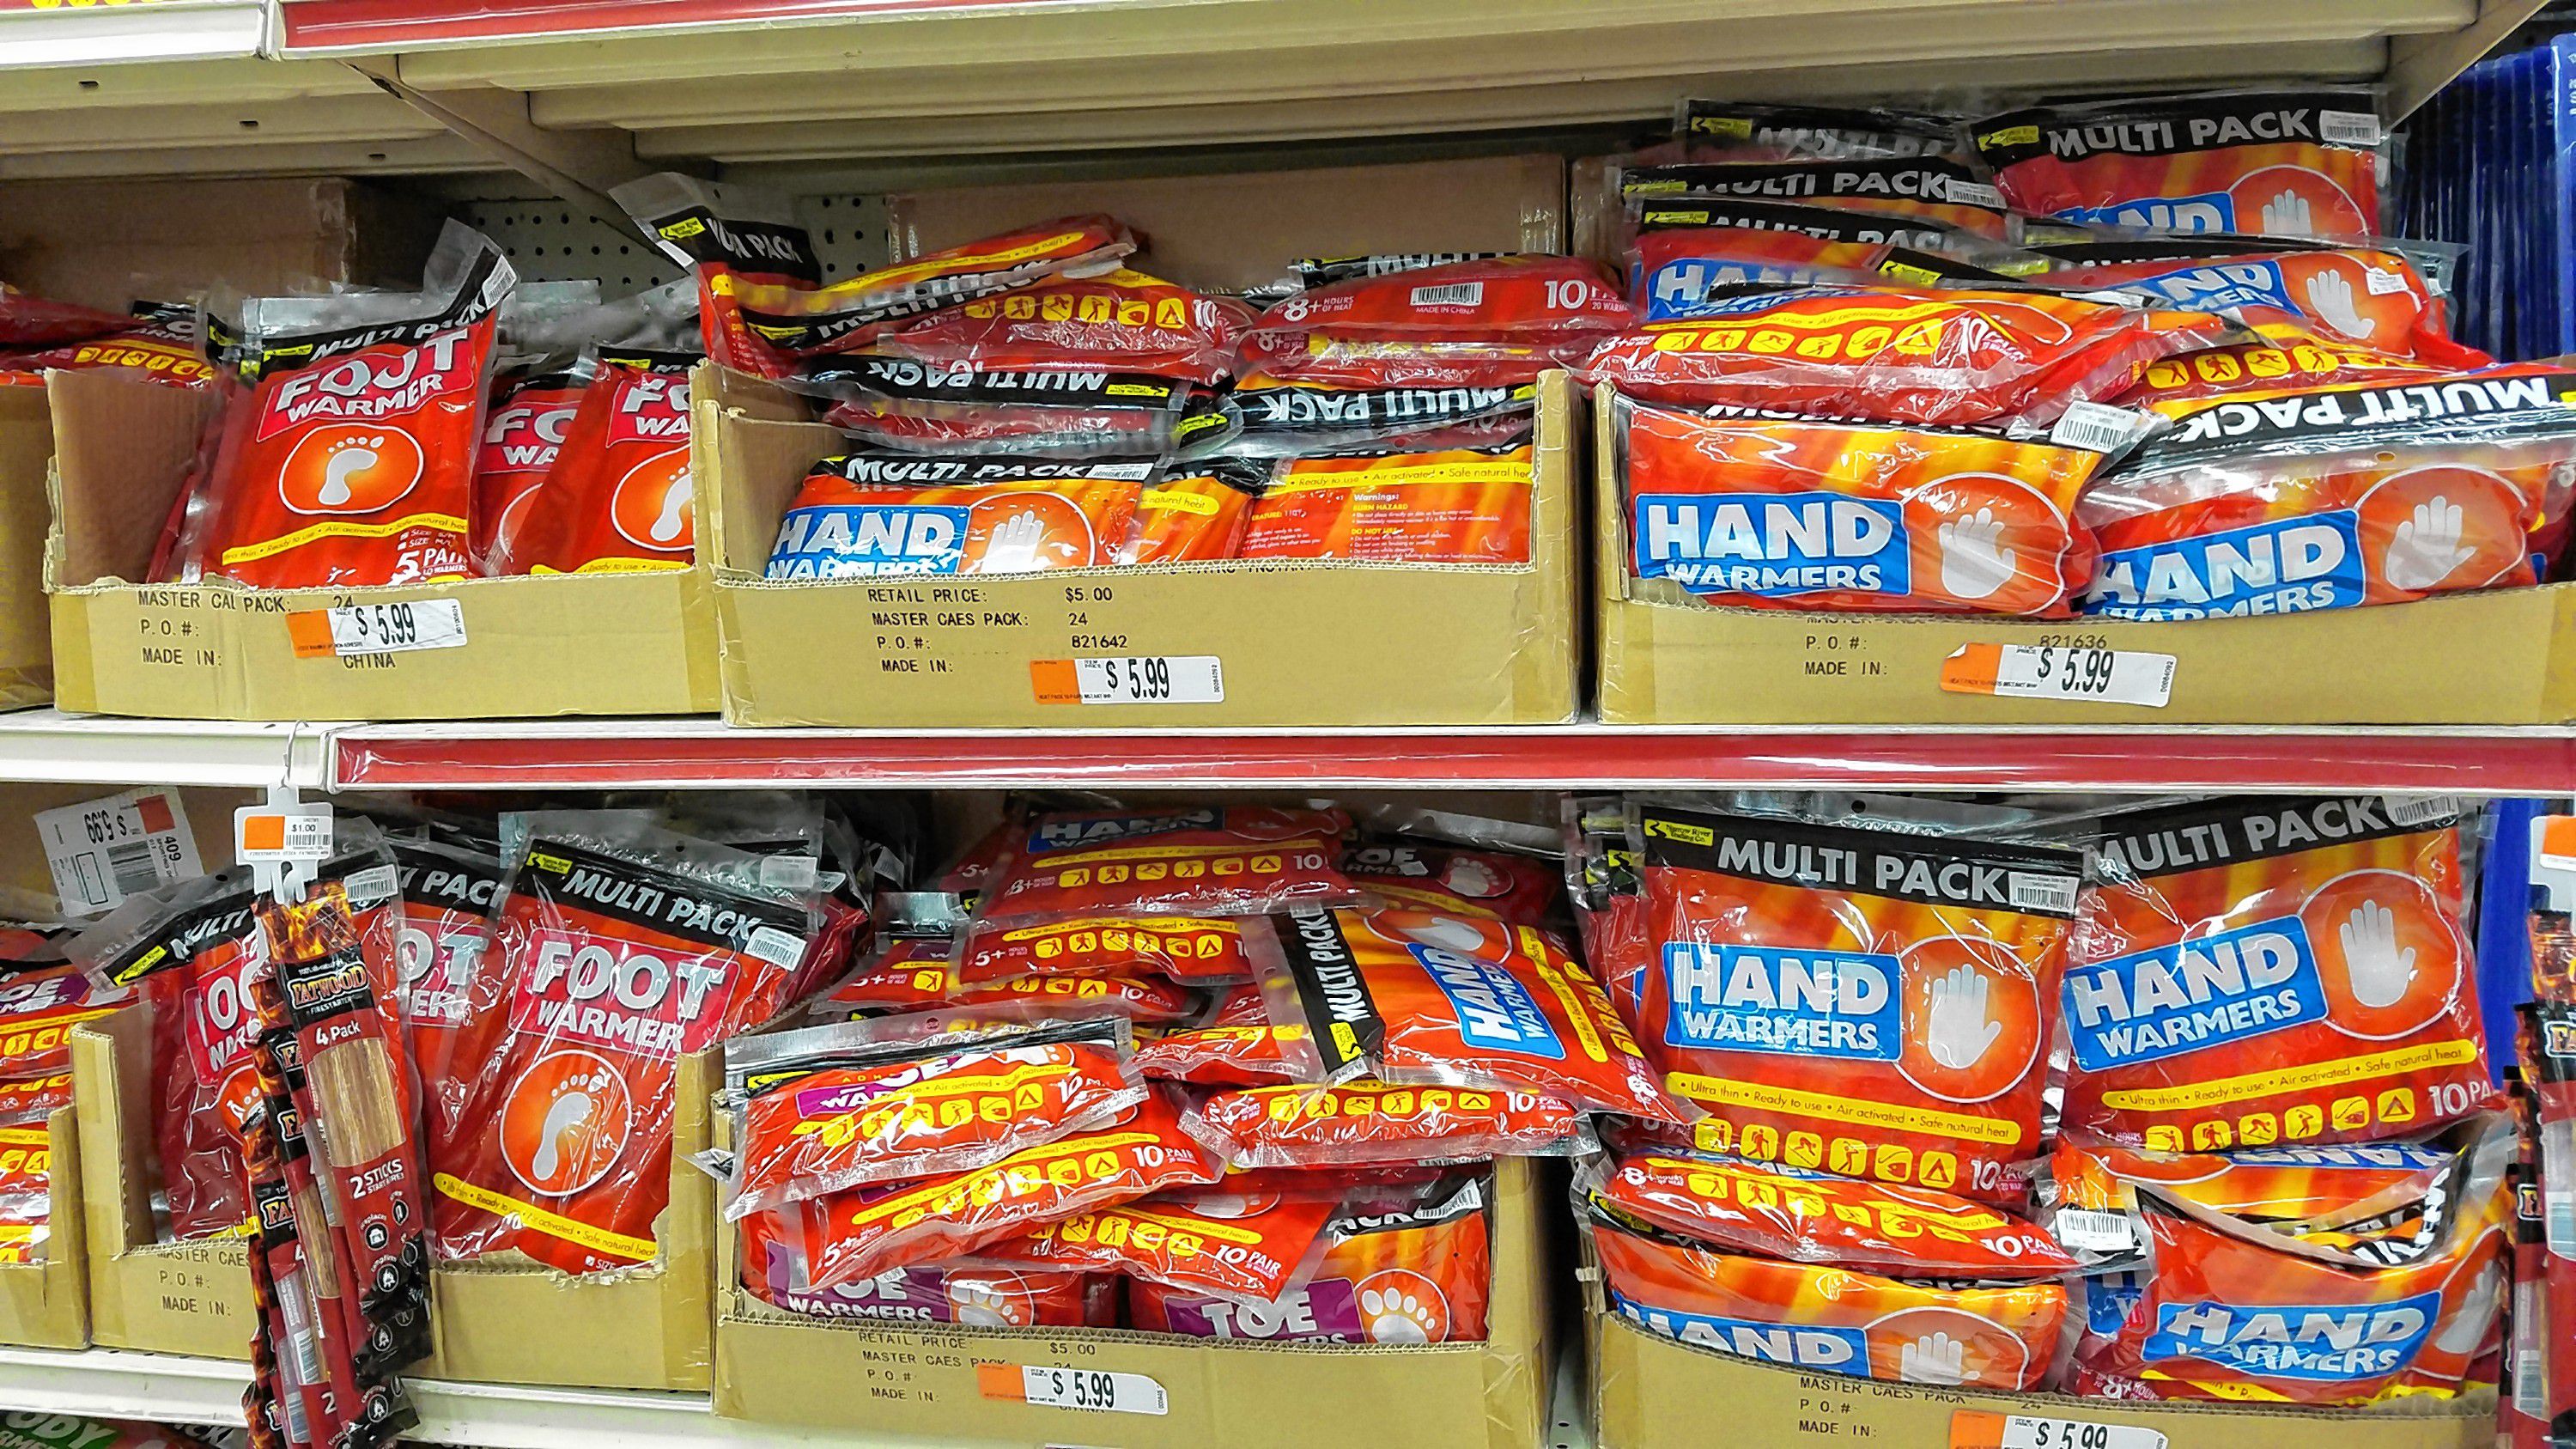 Perfect for ski trips, winter hikes or just going about your day when it's chilly out, these hand warmers are essential cold-weather items. JON BODELL / Insider staff